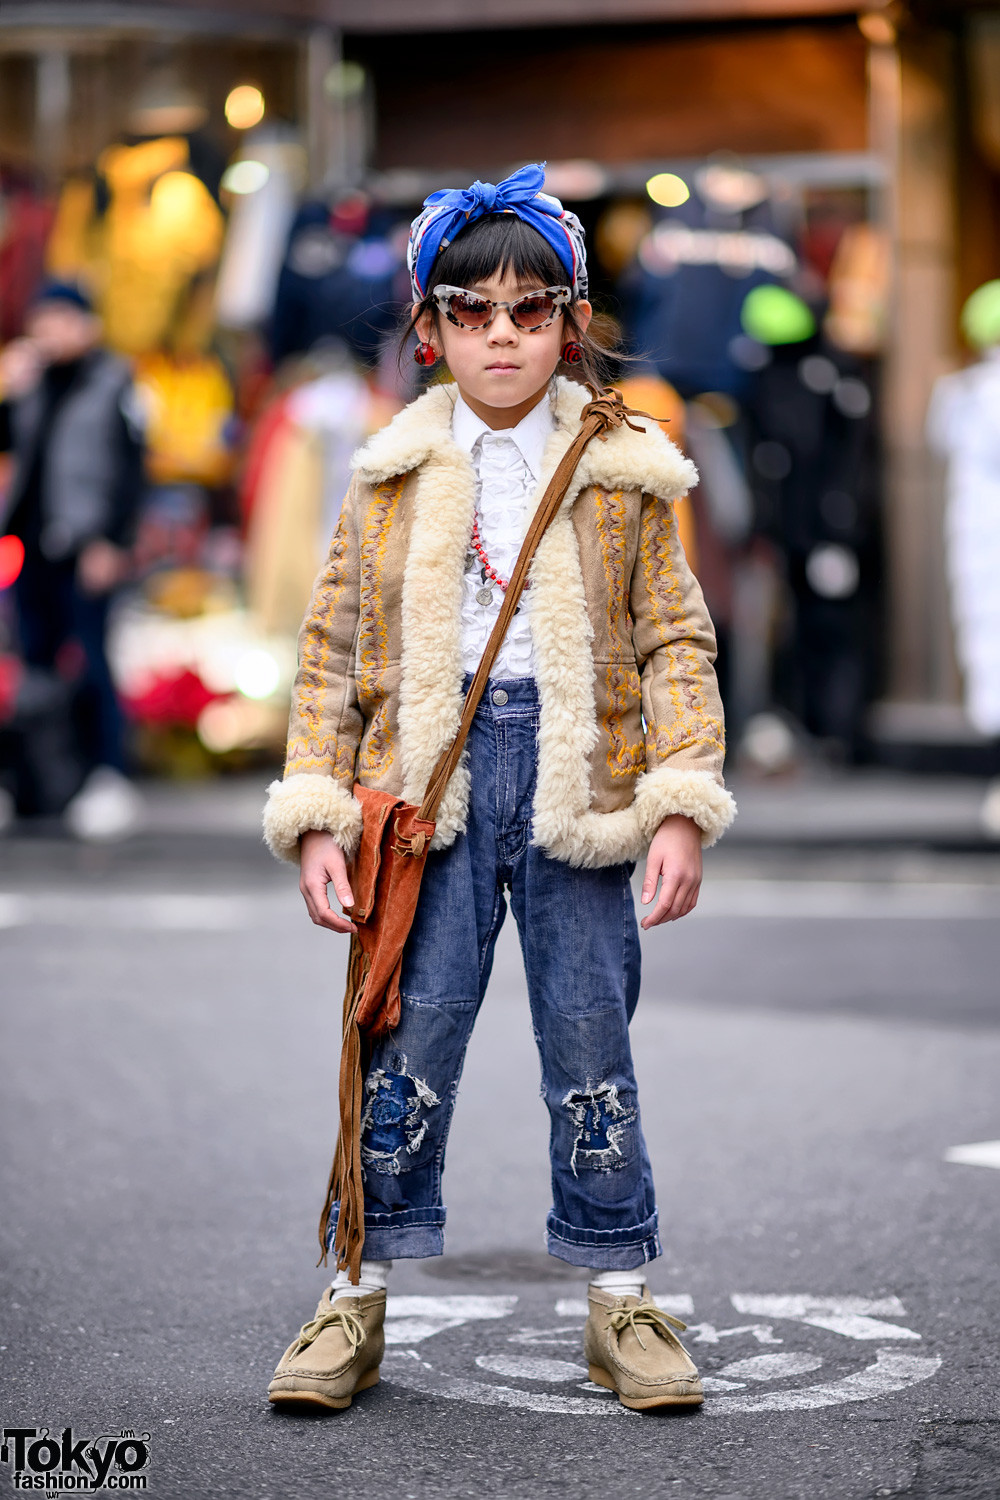 Japanese Kids Fashion
 6 Year Old Harajuku Girl in 1950s and 1970s Vintage Kids